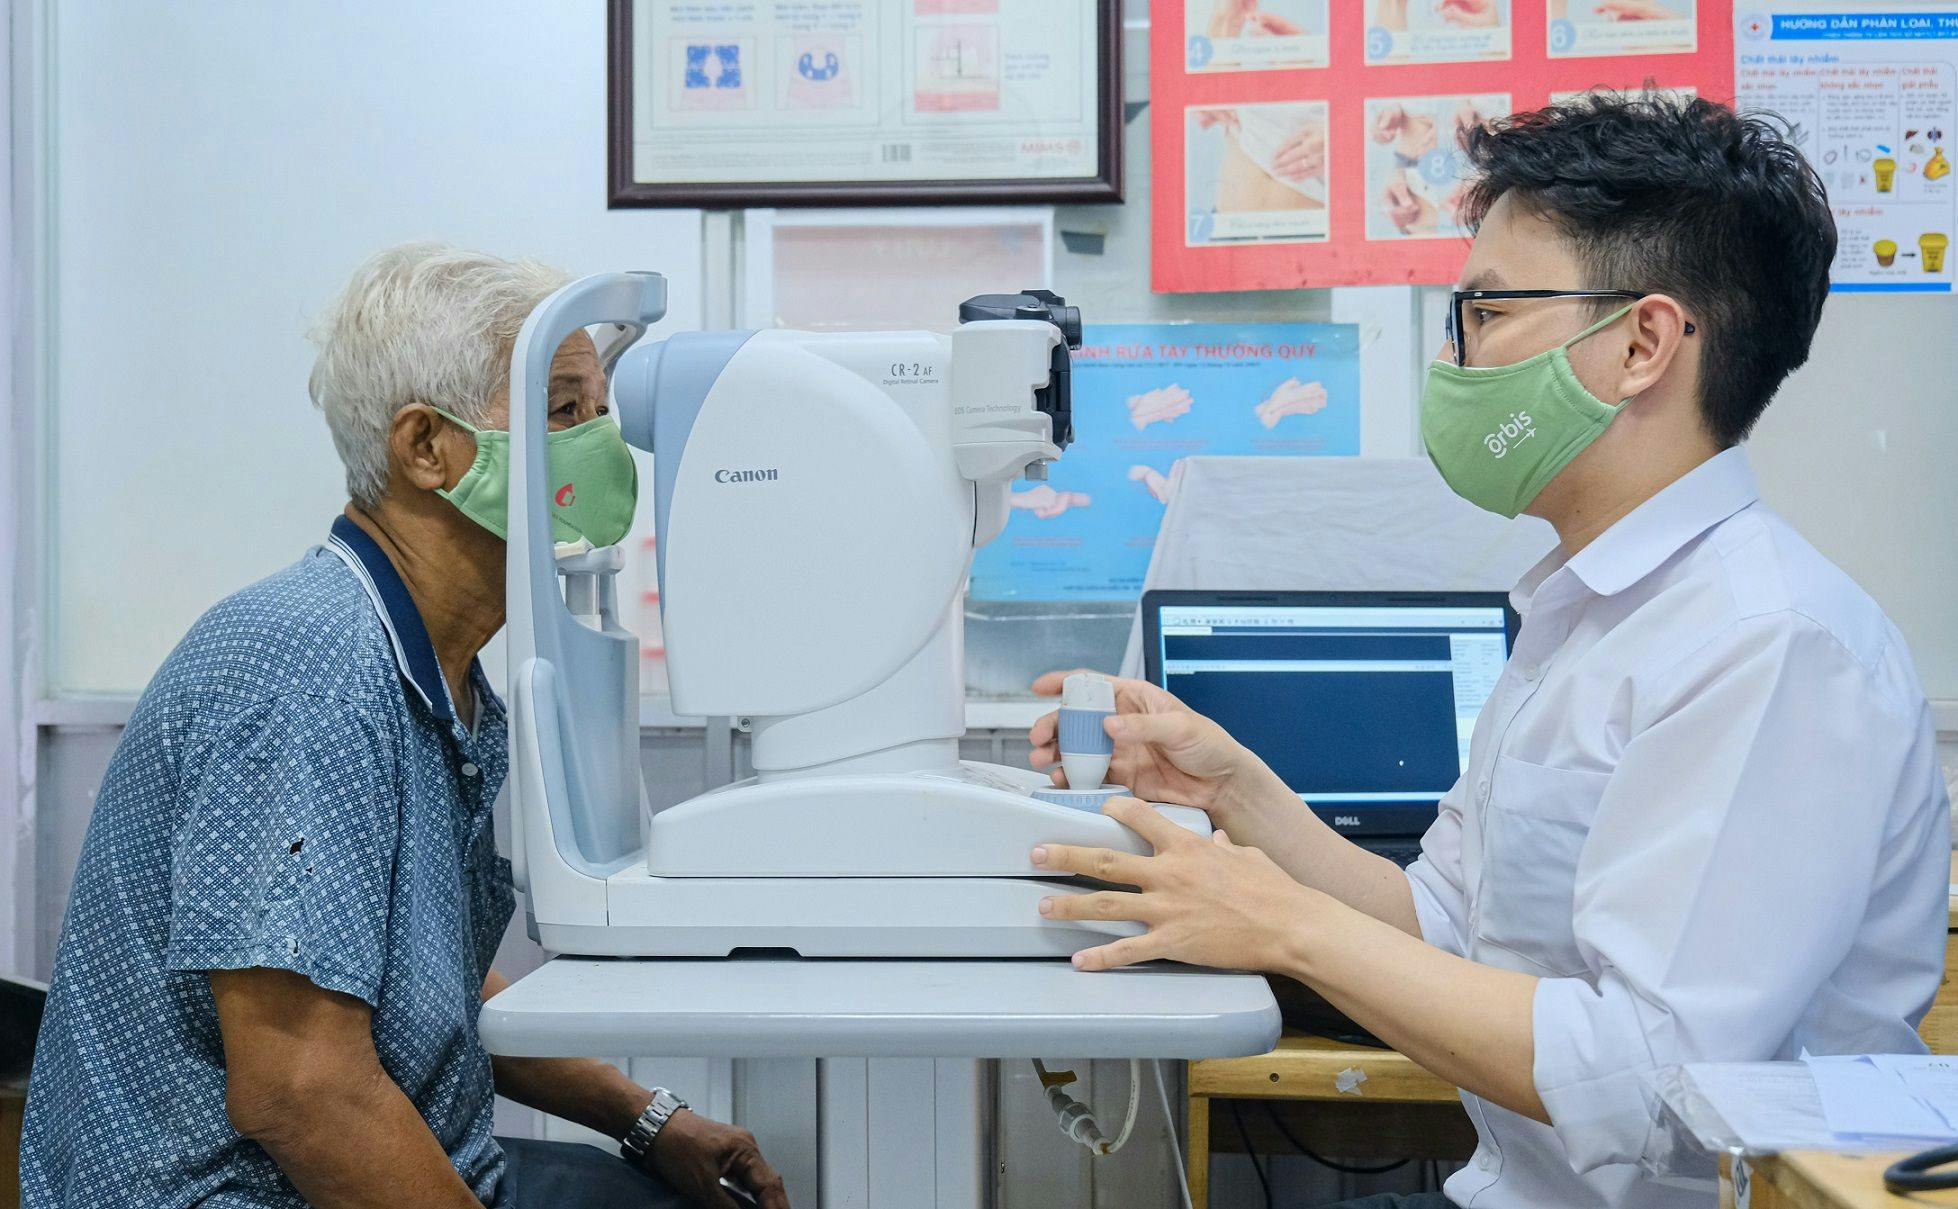 Providing comprehensive eye care for diabetic patients in southern Vietnam